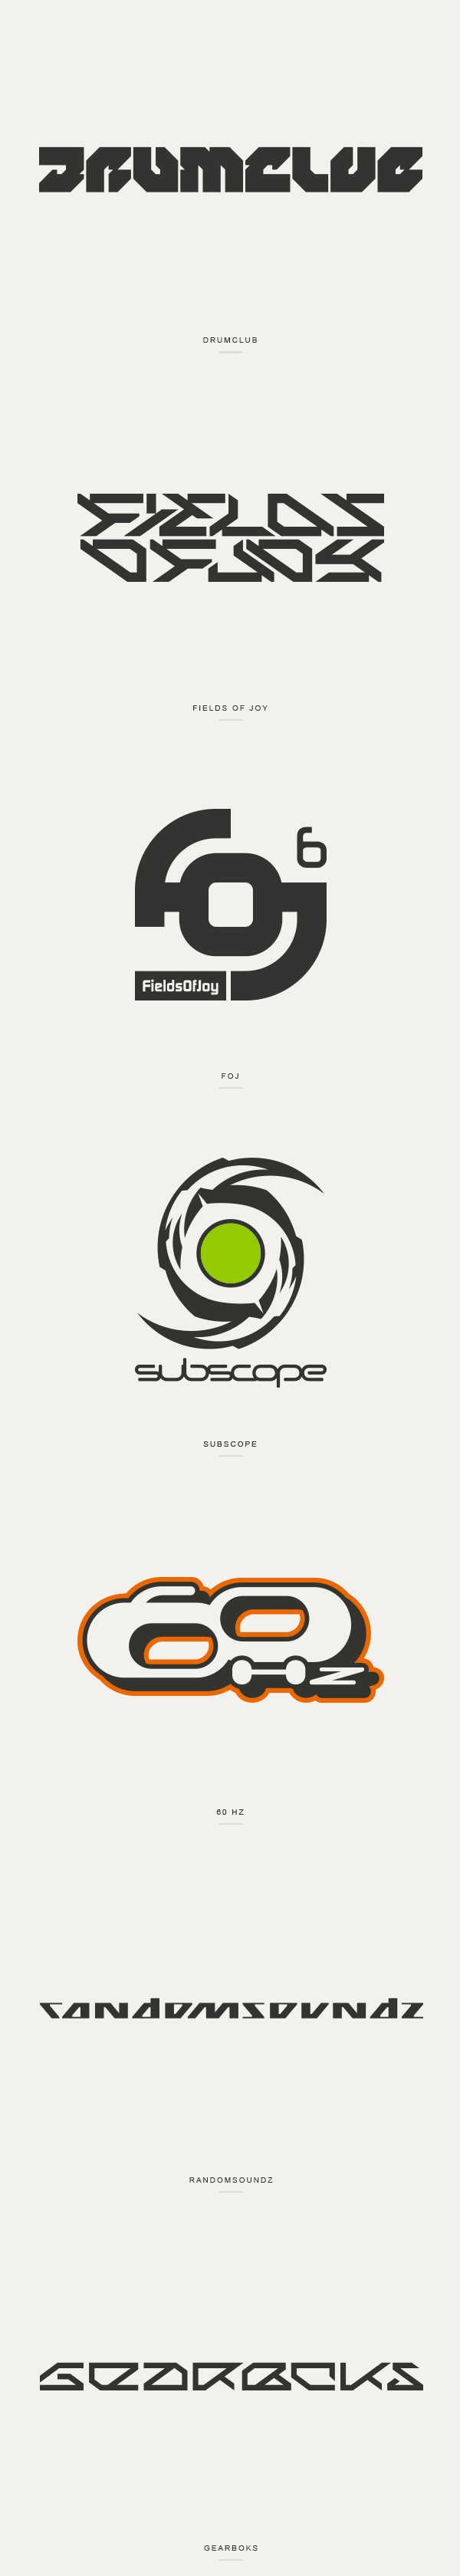 logo mark type symbol grid modular geometric letters lettering budapest Classic Collection fiftysix futuristic tech